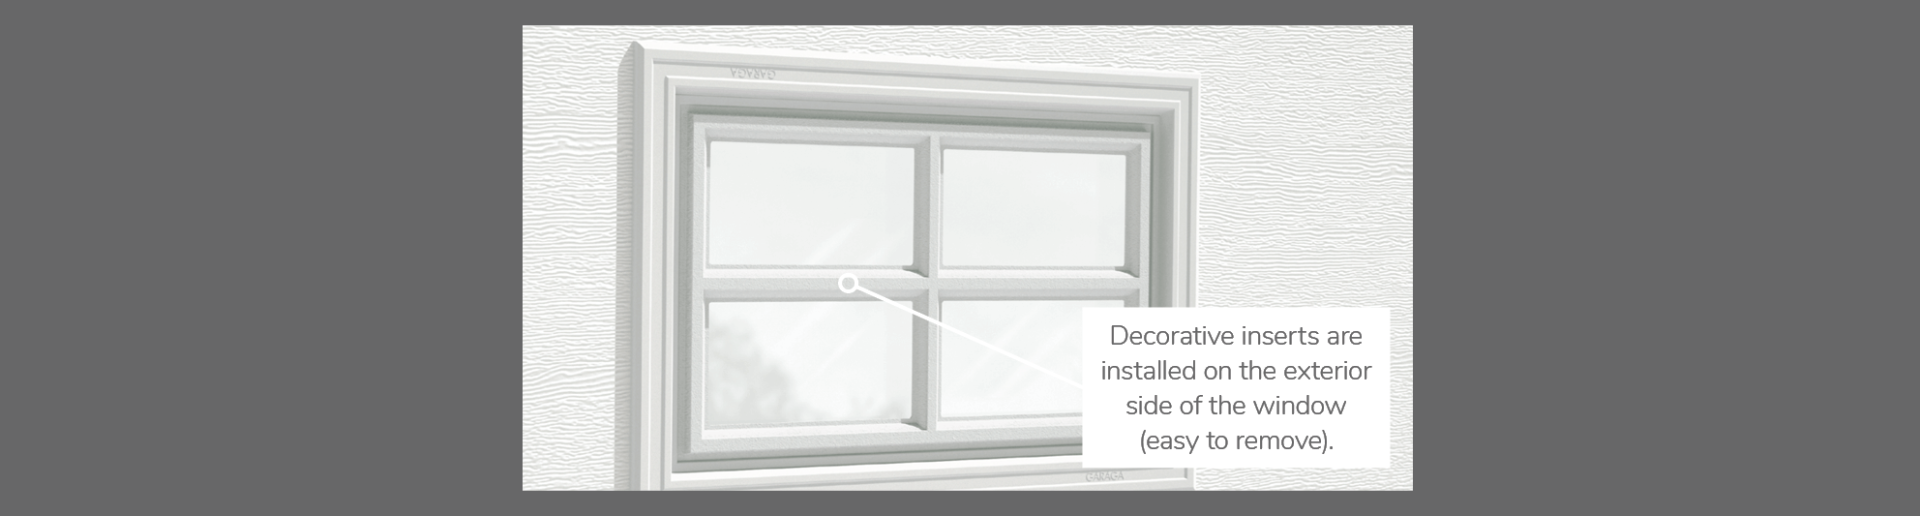 Stockton Decorative Insert, 20" x 13", available for door 3 layers - Polystyrene, 2 layers - Polystyrene and Non-insulated